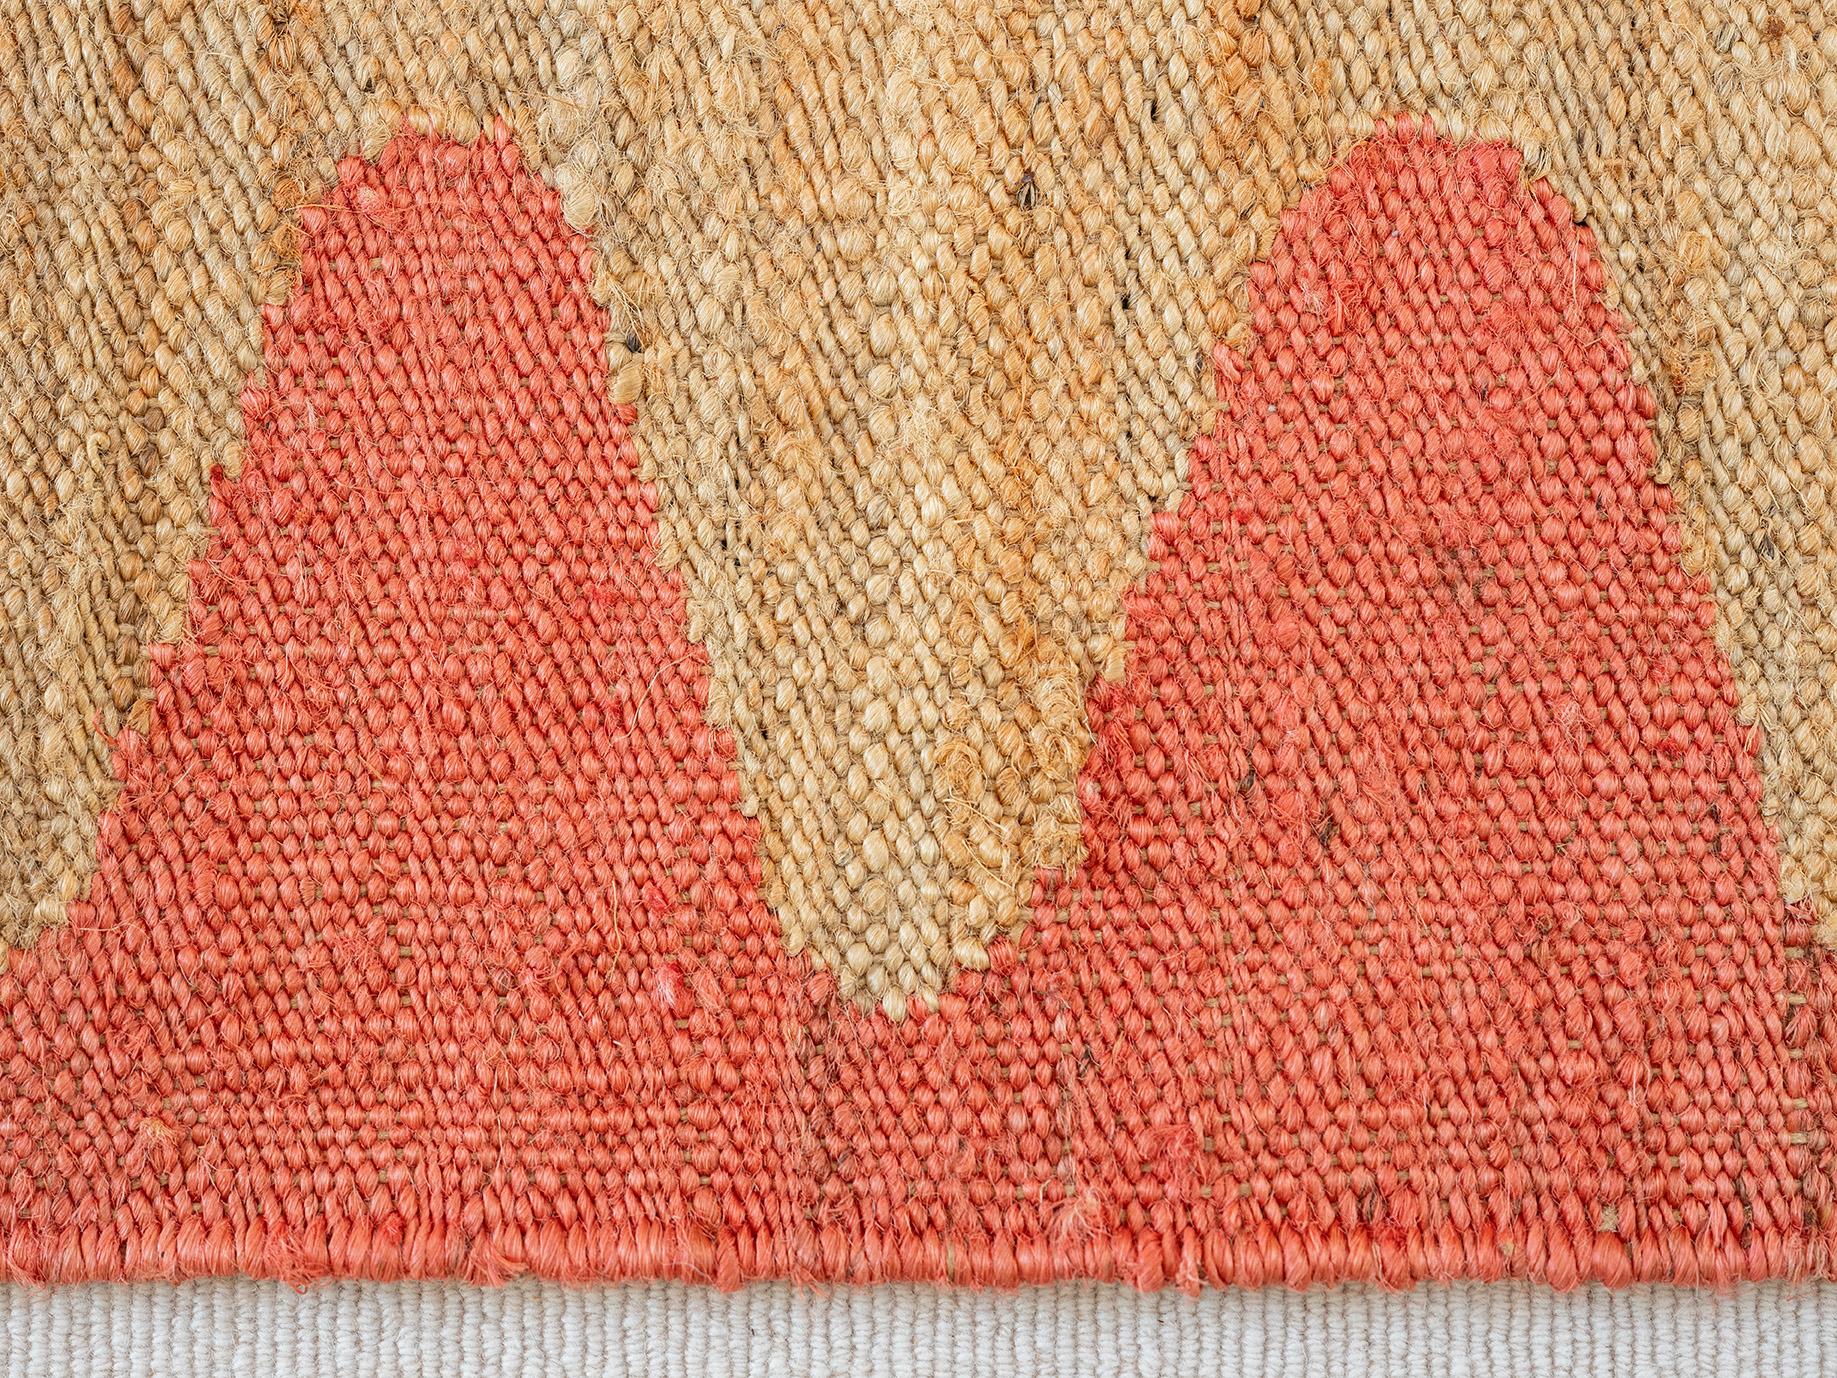 Hand-Woven Modern Handwoven Jute Carpet Rug Kilim in Natural & Coral For Sale